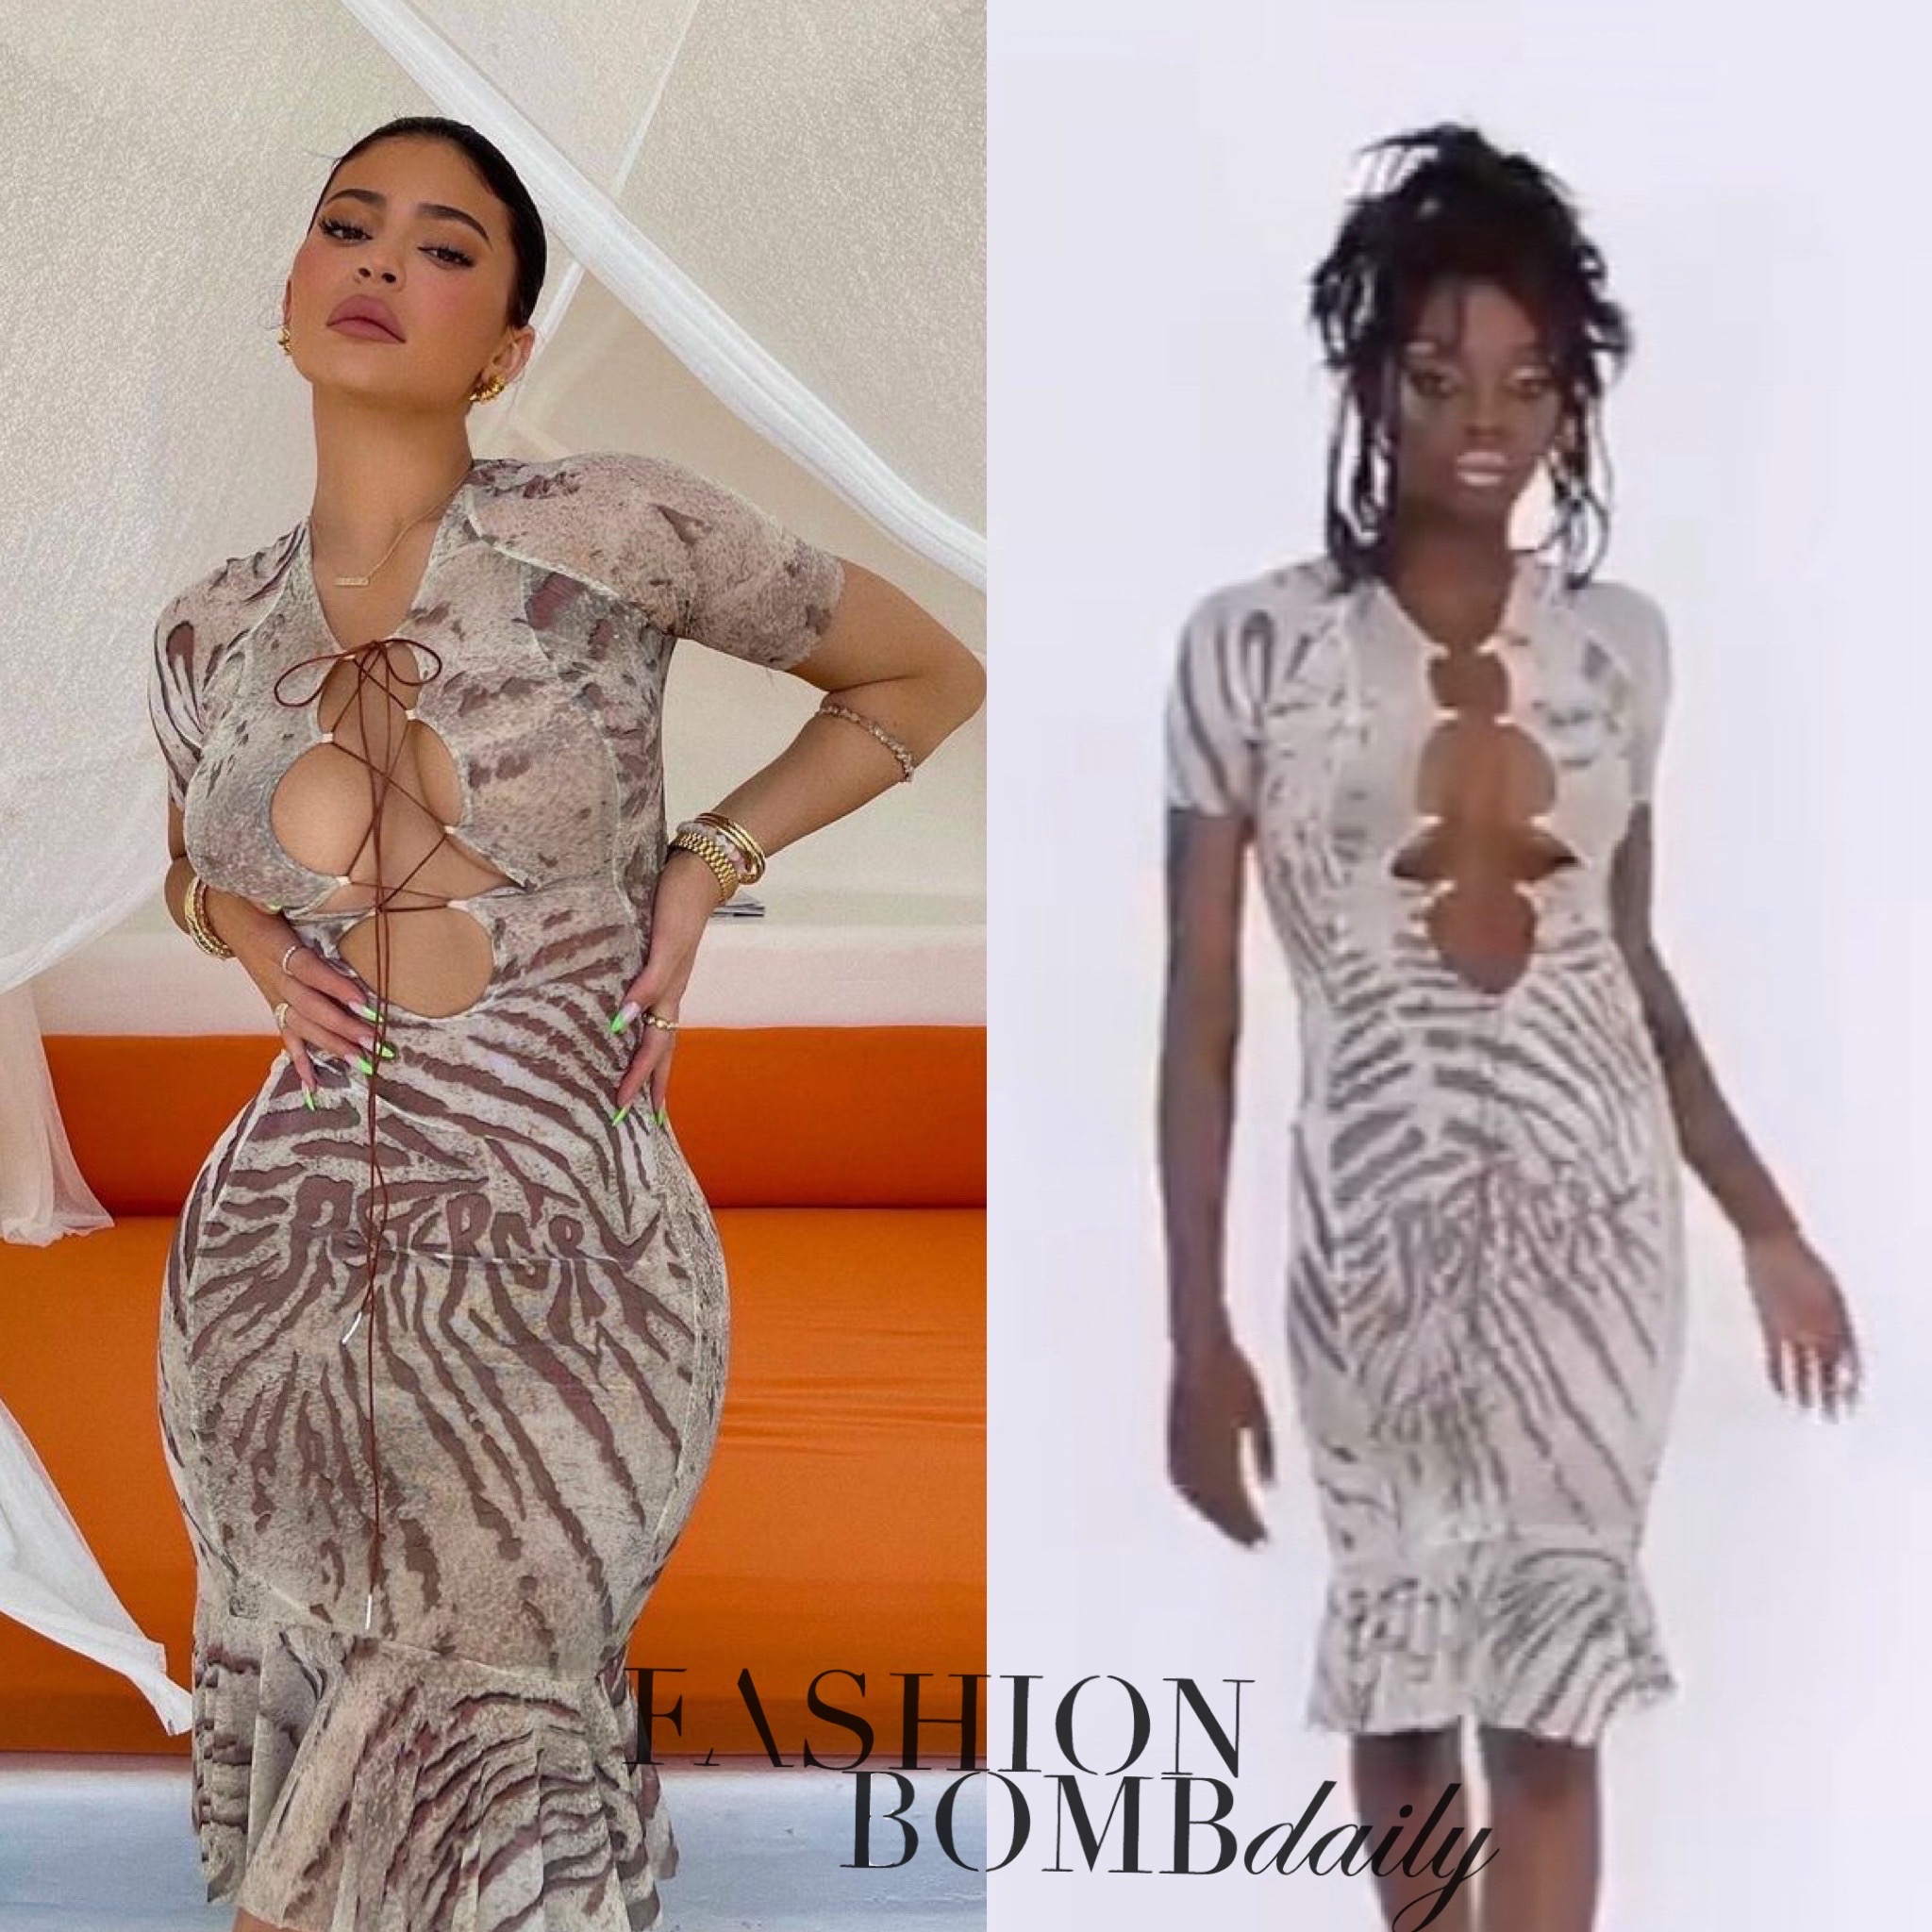 Most Requested Kylie Jenner S Instagram Poster Girl Official Lace Up Zebra Print Ruffle Hem Dress Fashion Bomb Daily Style Magazine Celebrity Fashion Fashion News What To Wear Runway Show Reviews